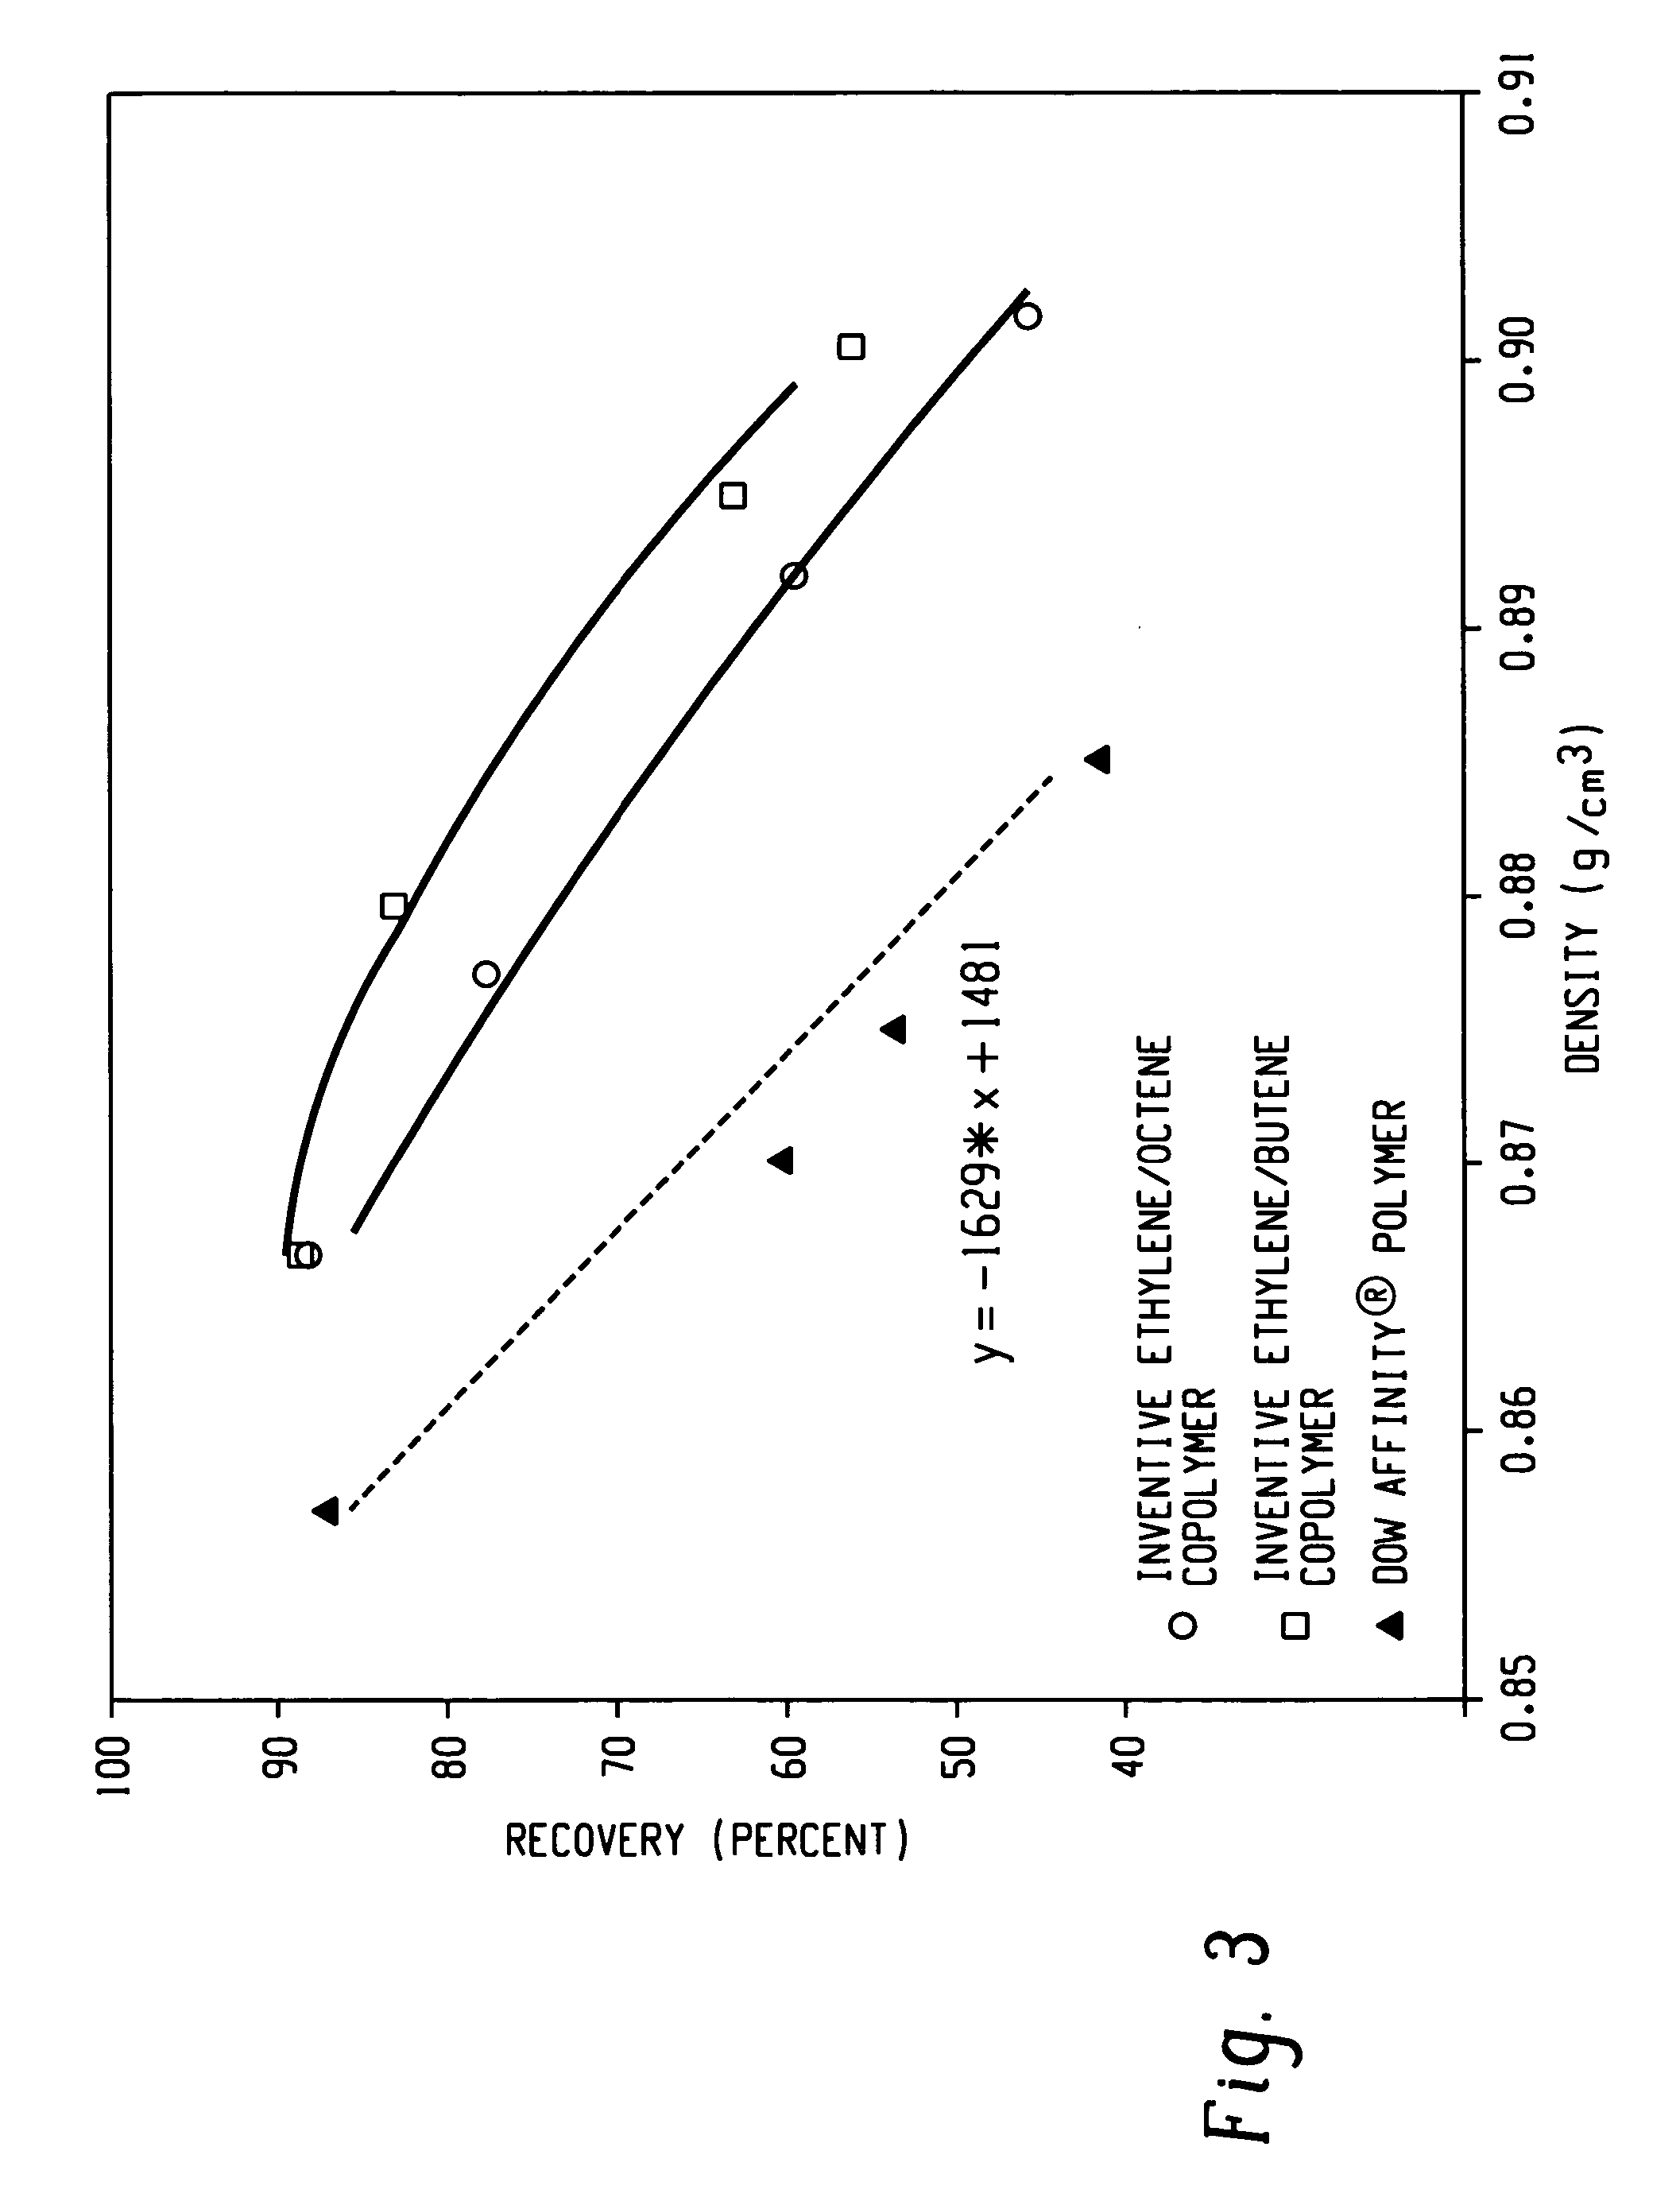 Filled polymer compositions made from interpolymers of ethylene/a-olefins and uses thereof